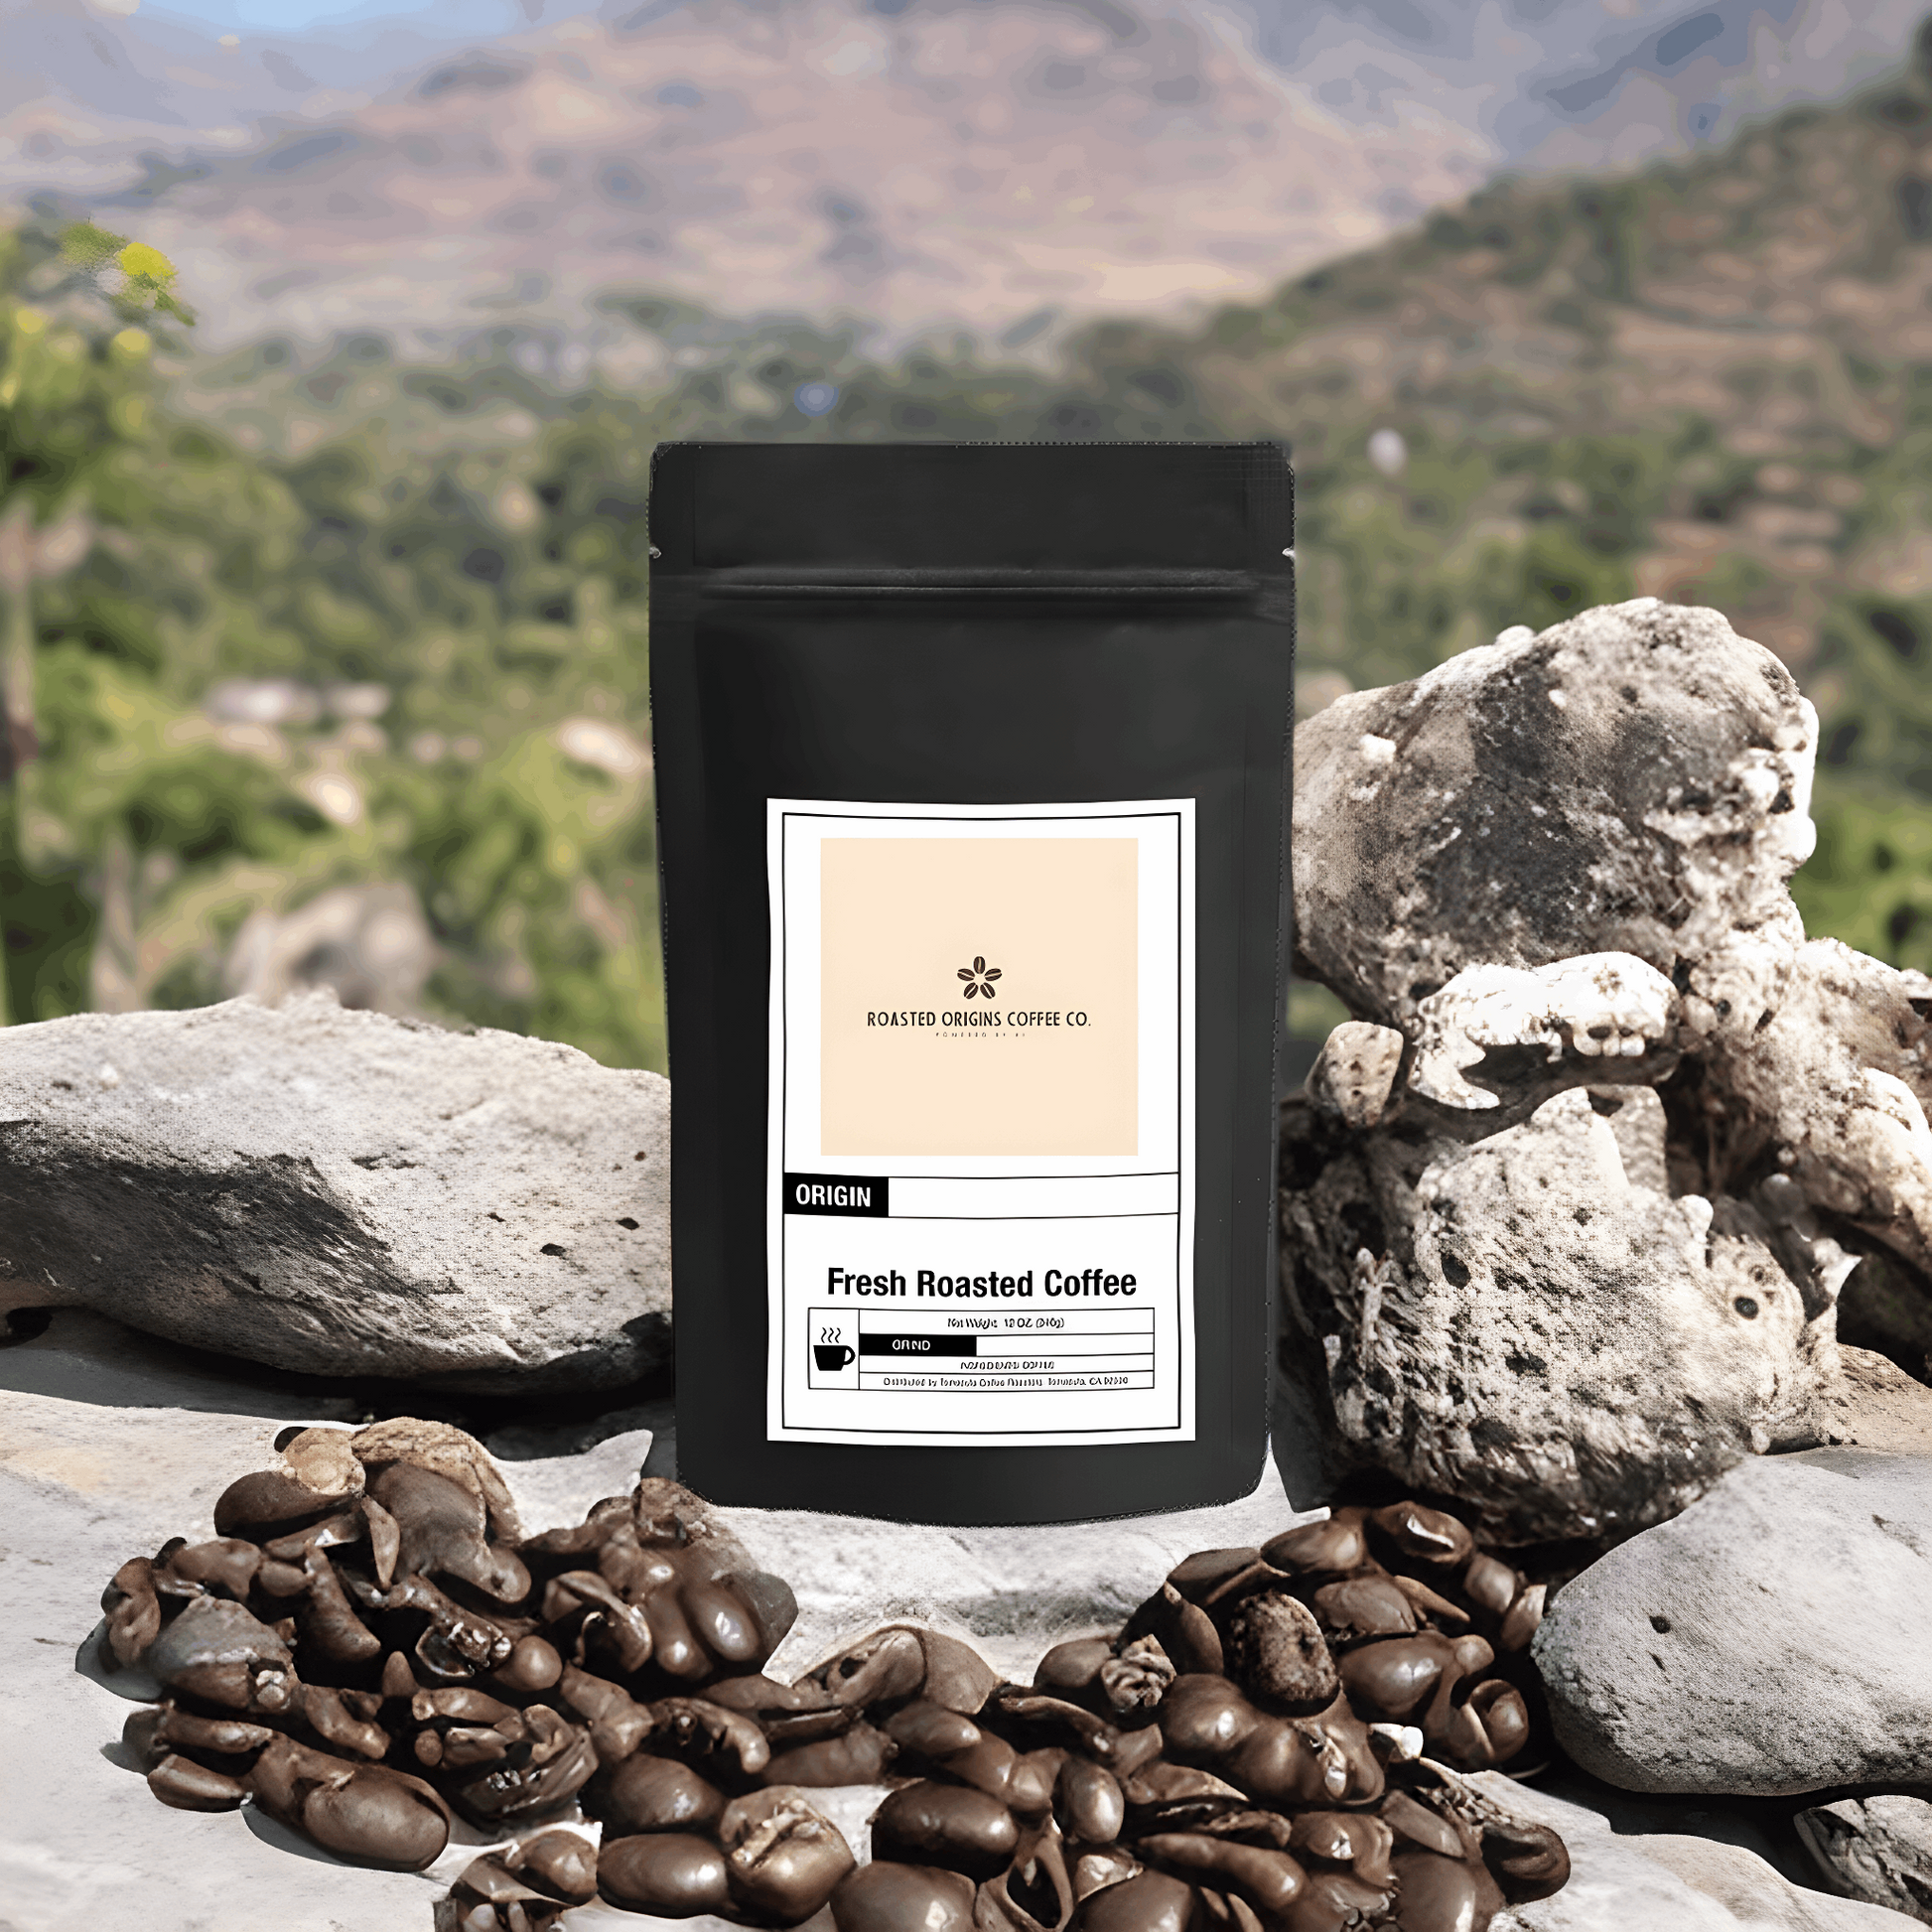 a bag of Ethiopia Natural coffee next to rocks and coffee beans